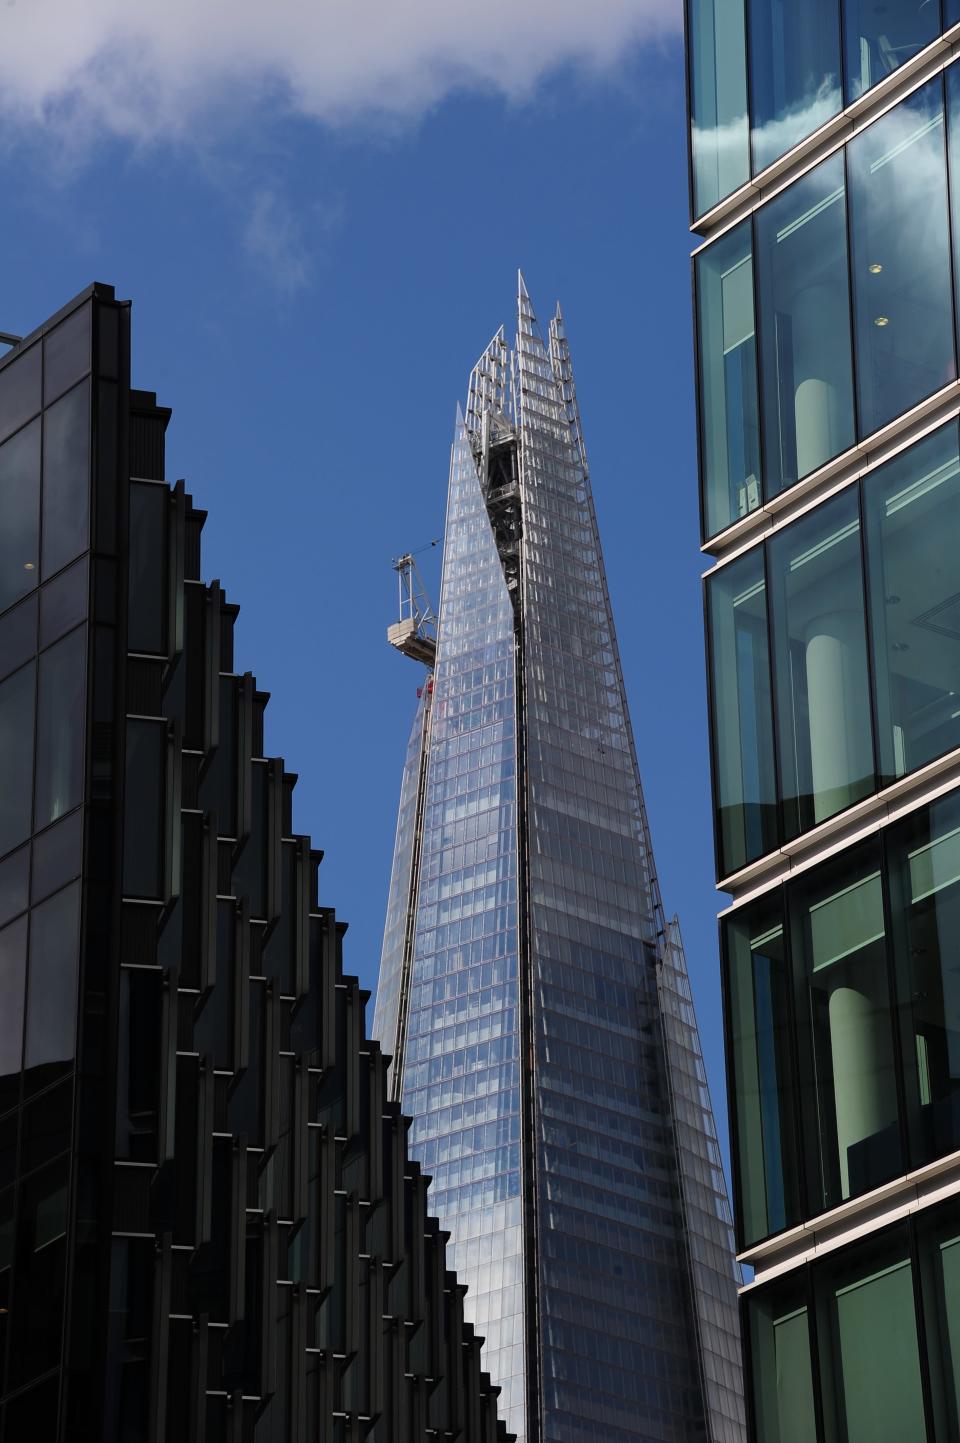 "The elongated glass pyramid, built atop a train station in a scruffy neighbourhood near the Thames, will open with 26 floors of vacant office space, and developers have to fill it at a time when rents are at the flattest in at least 50 years," newswire Reuters reported. (AFP PHOTO/MIGUEL MEDINA)